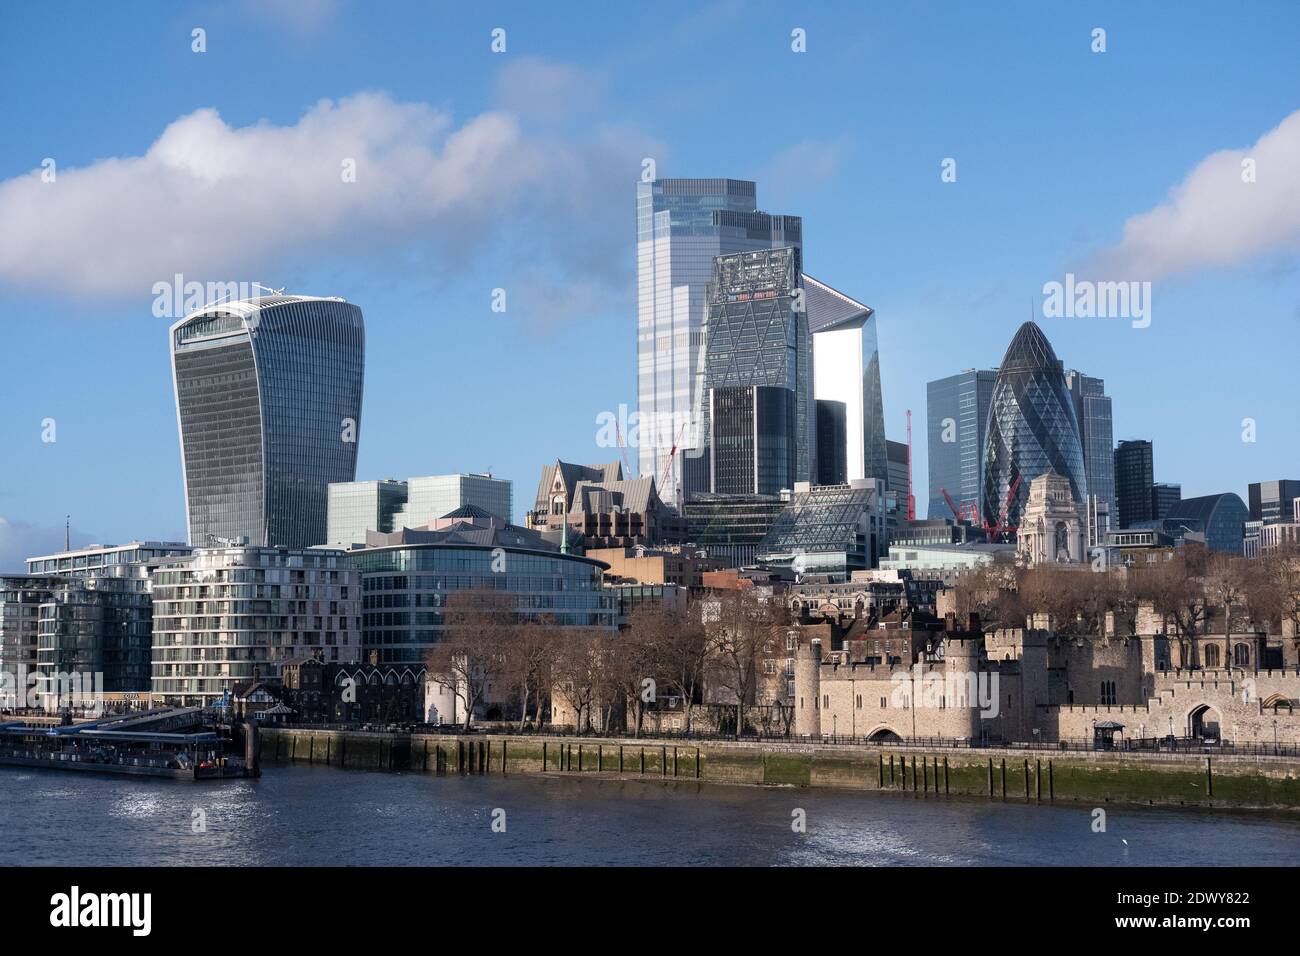 London UK - December 2020 : London cityscape with Tower of London and ...